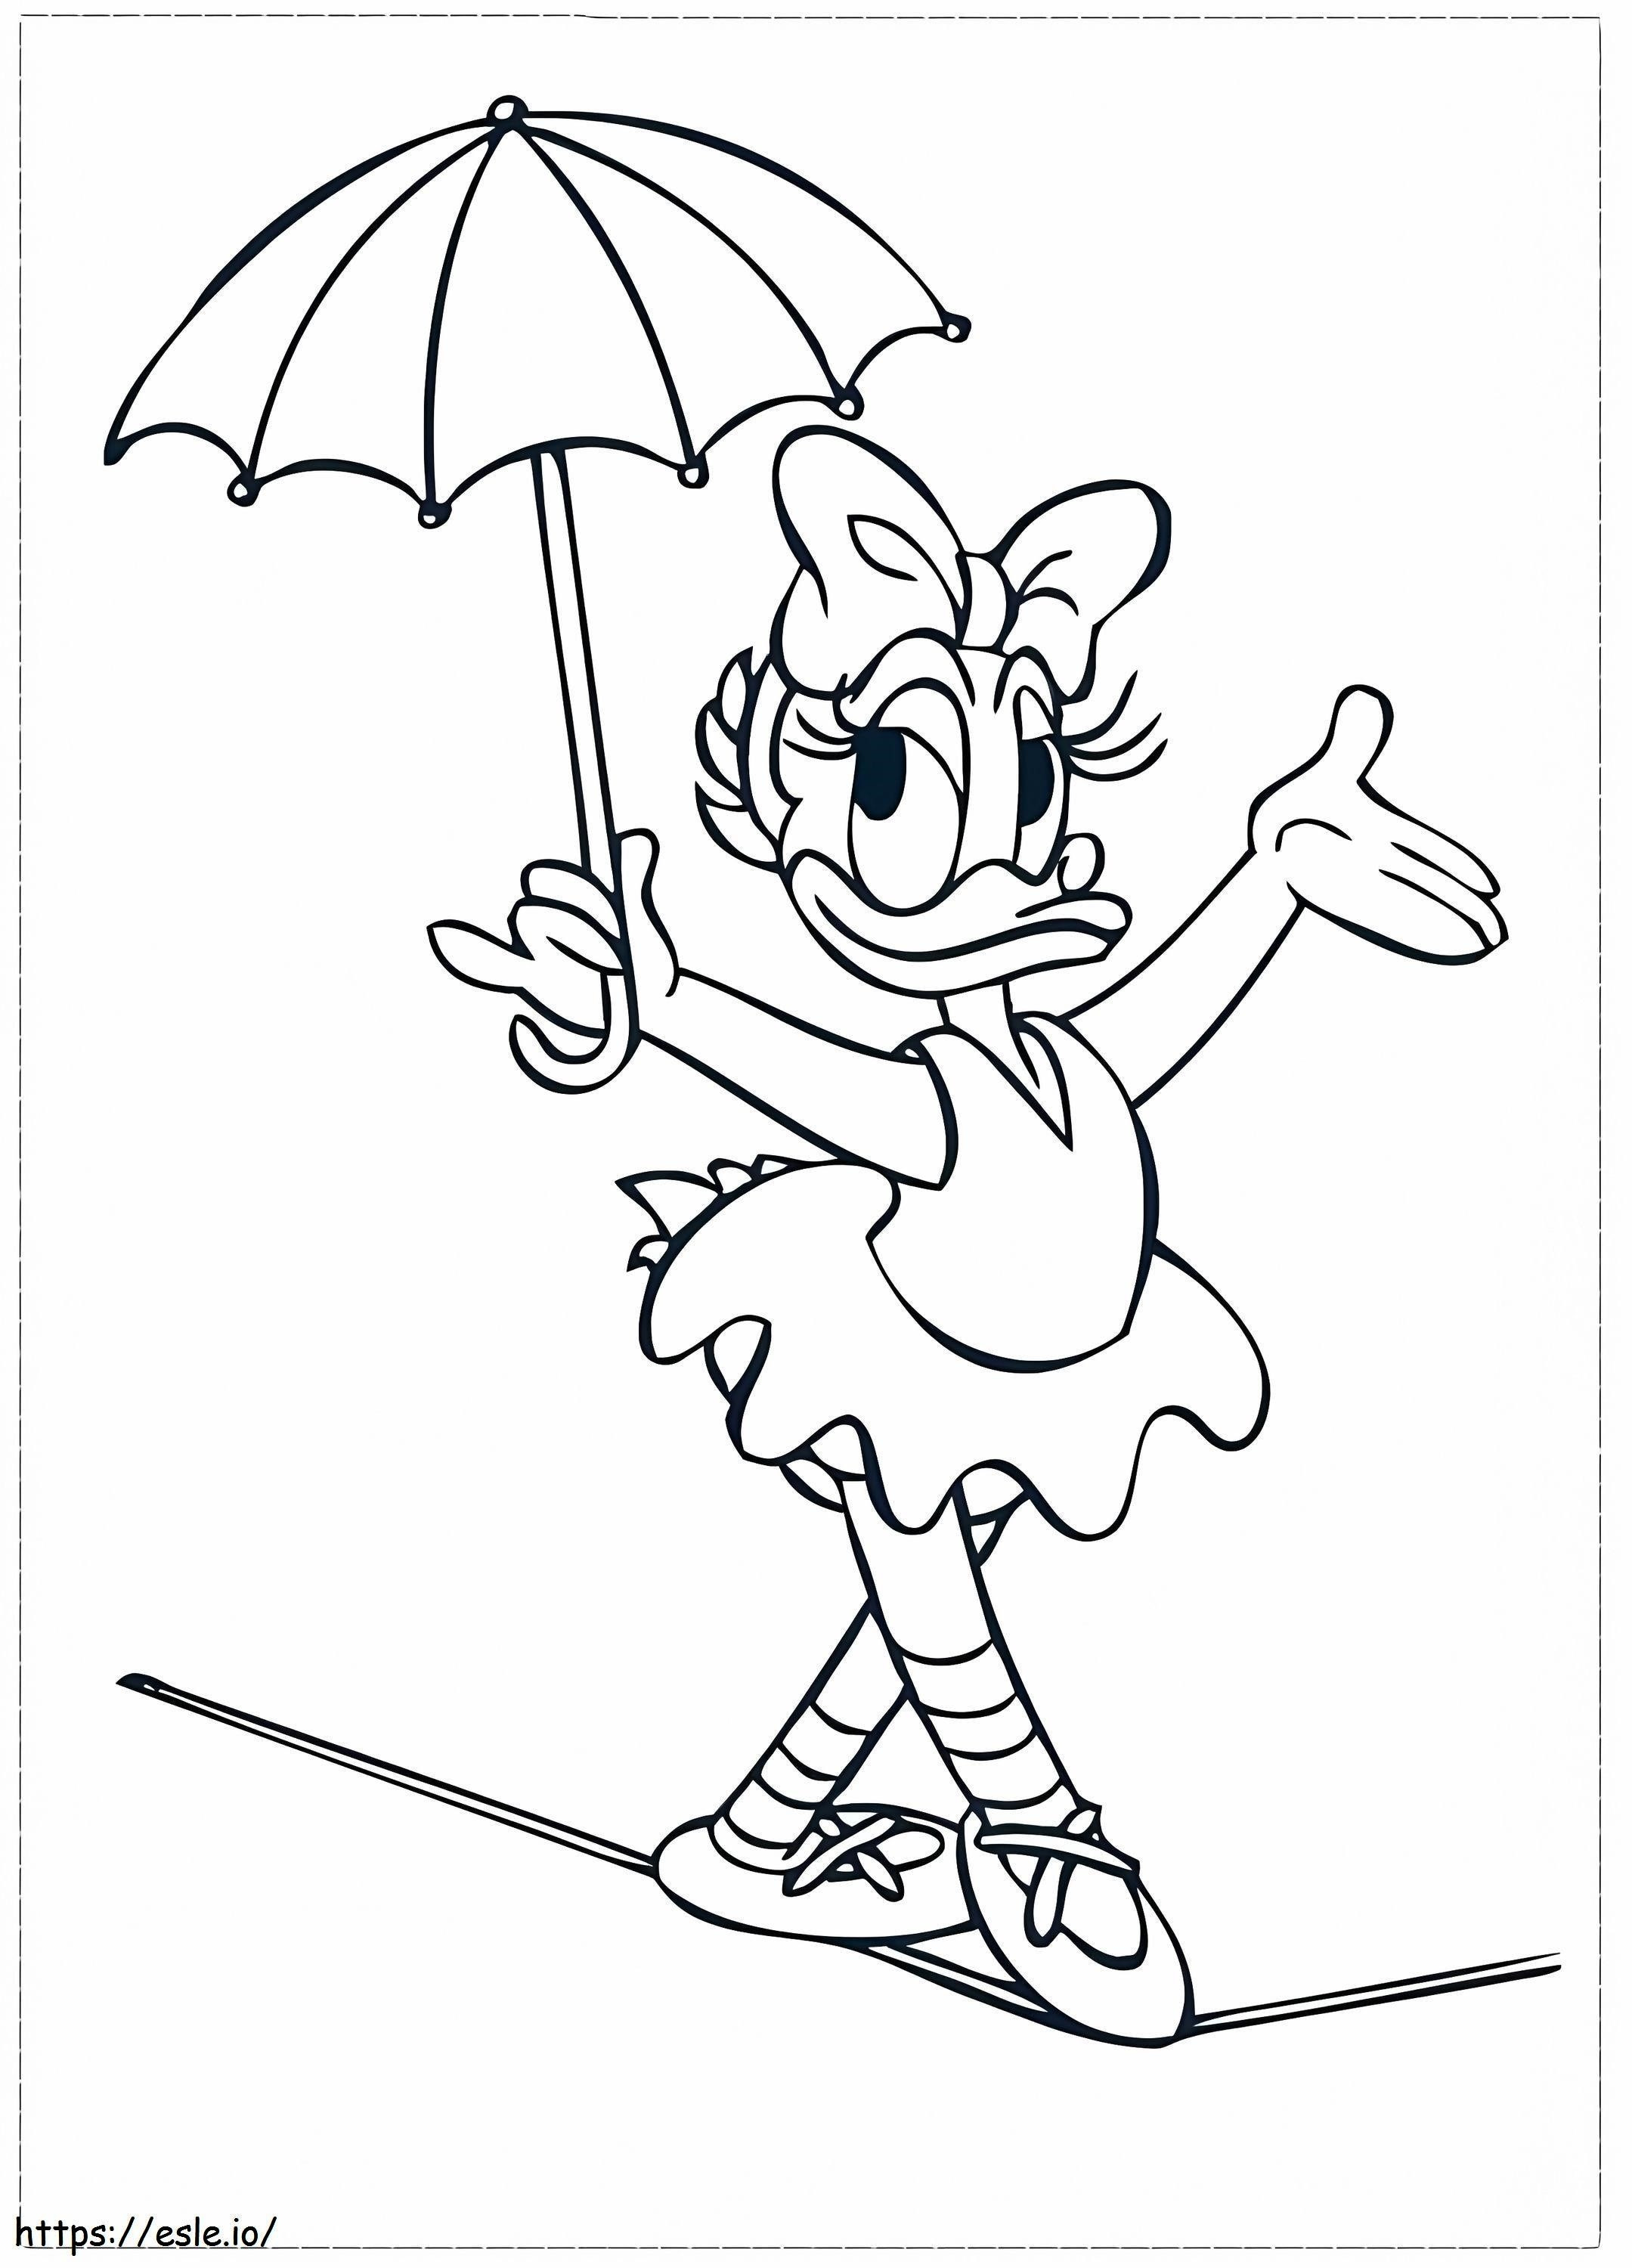 Daisy Duck Holding Umbrella Dance Ballet coloring page